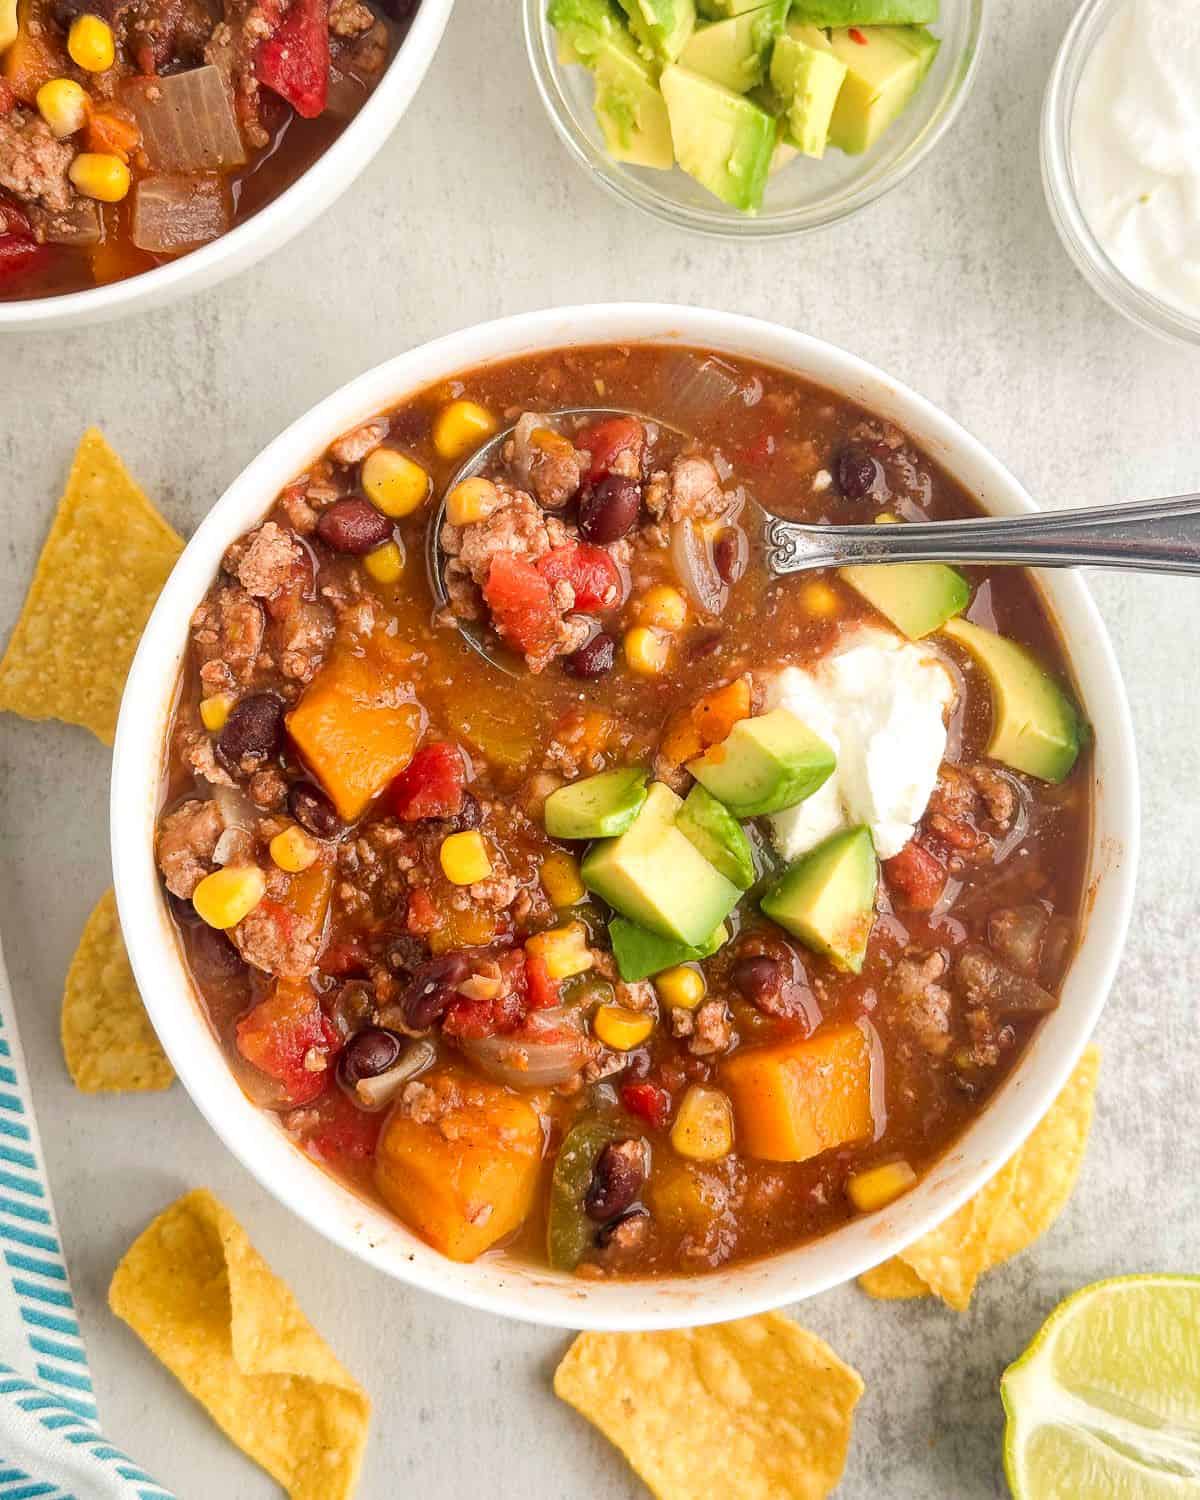 Chili with sweet potato and squash in a white bowl with a spoon, surrounded by tortilla chips.